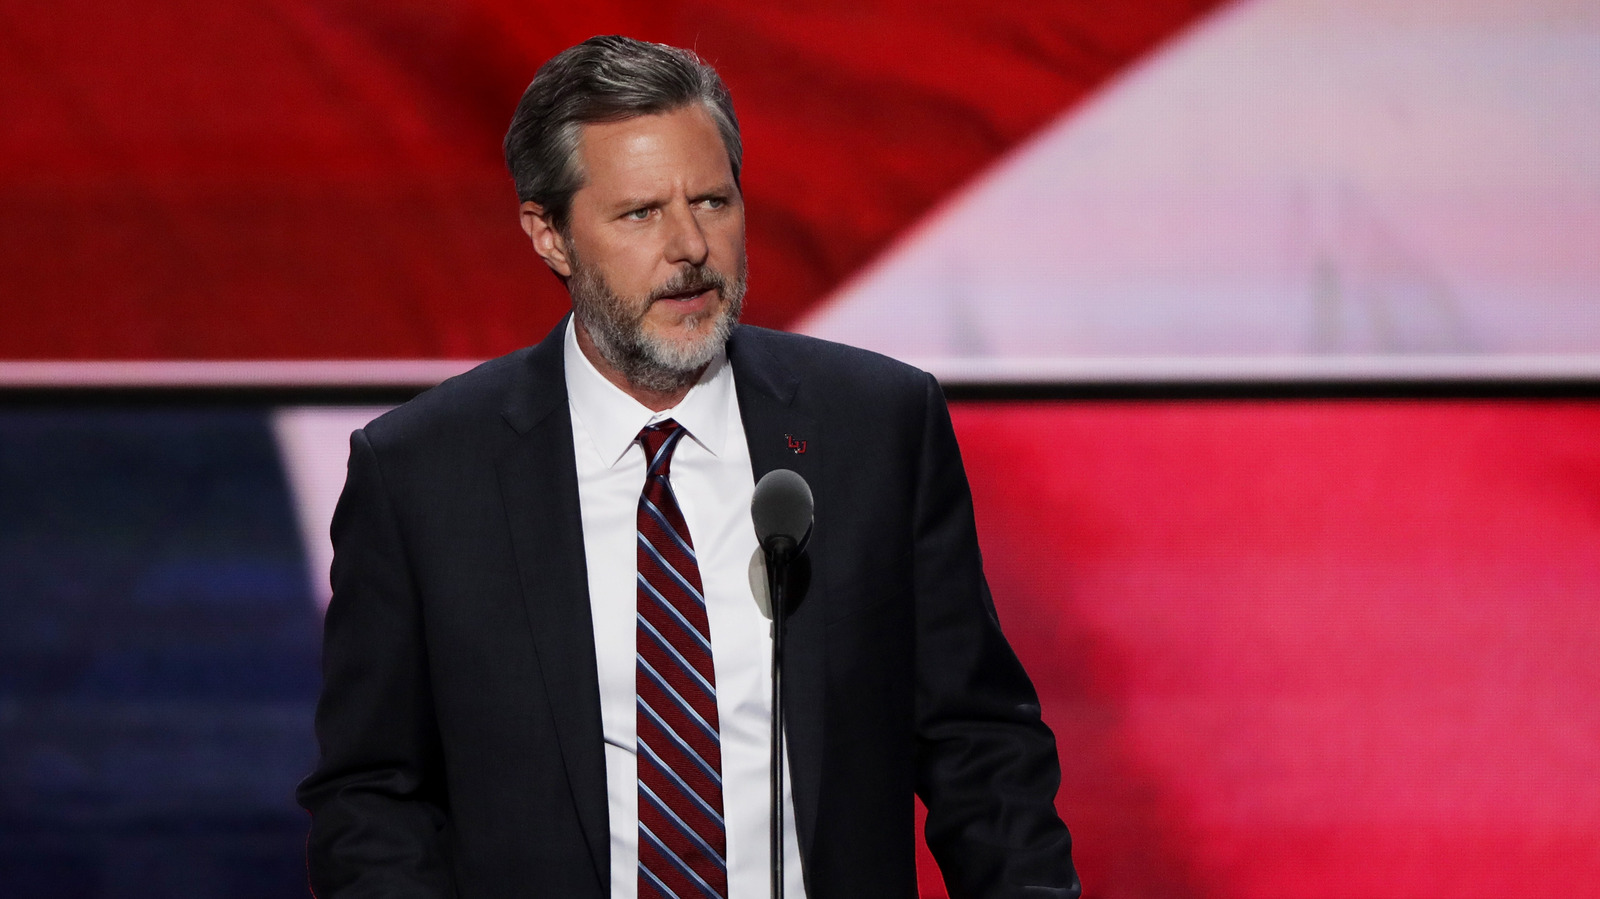 What Happened To Jerry Falwell Jr?